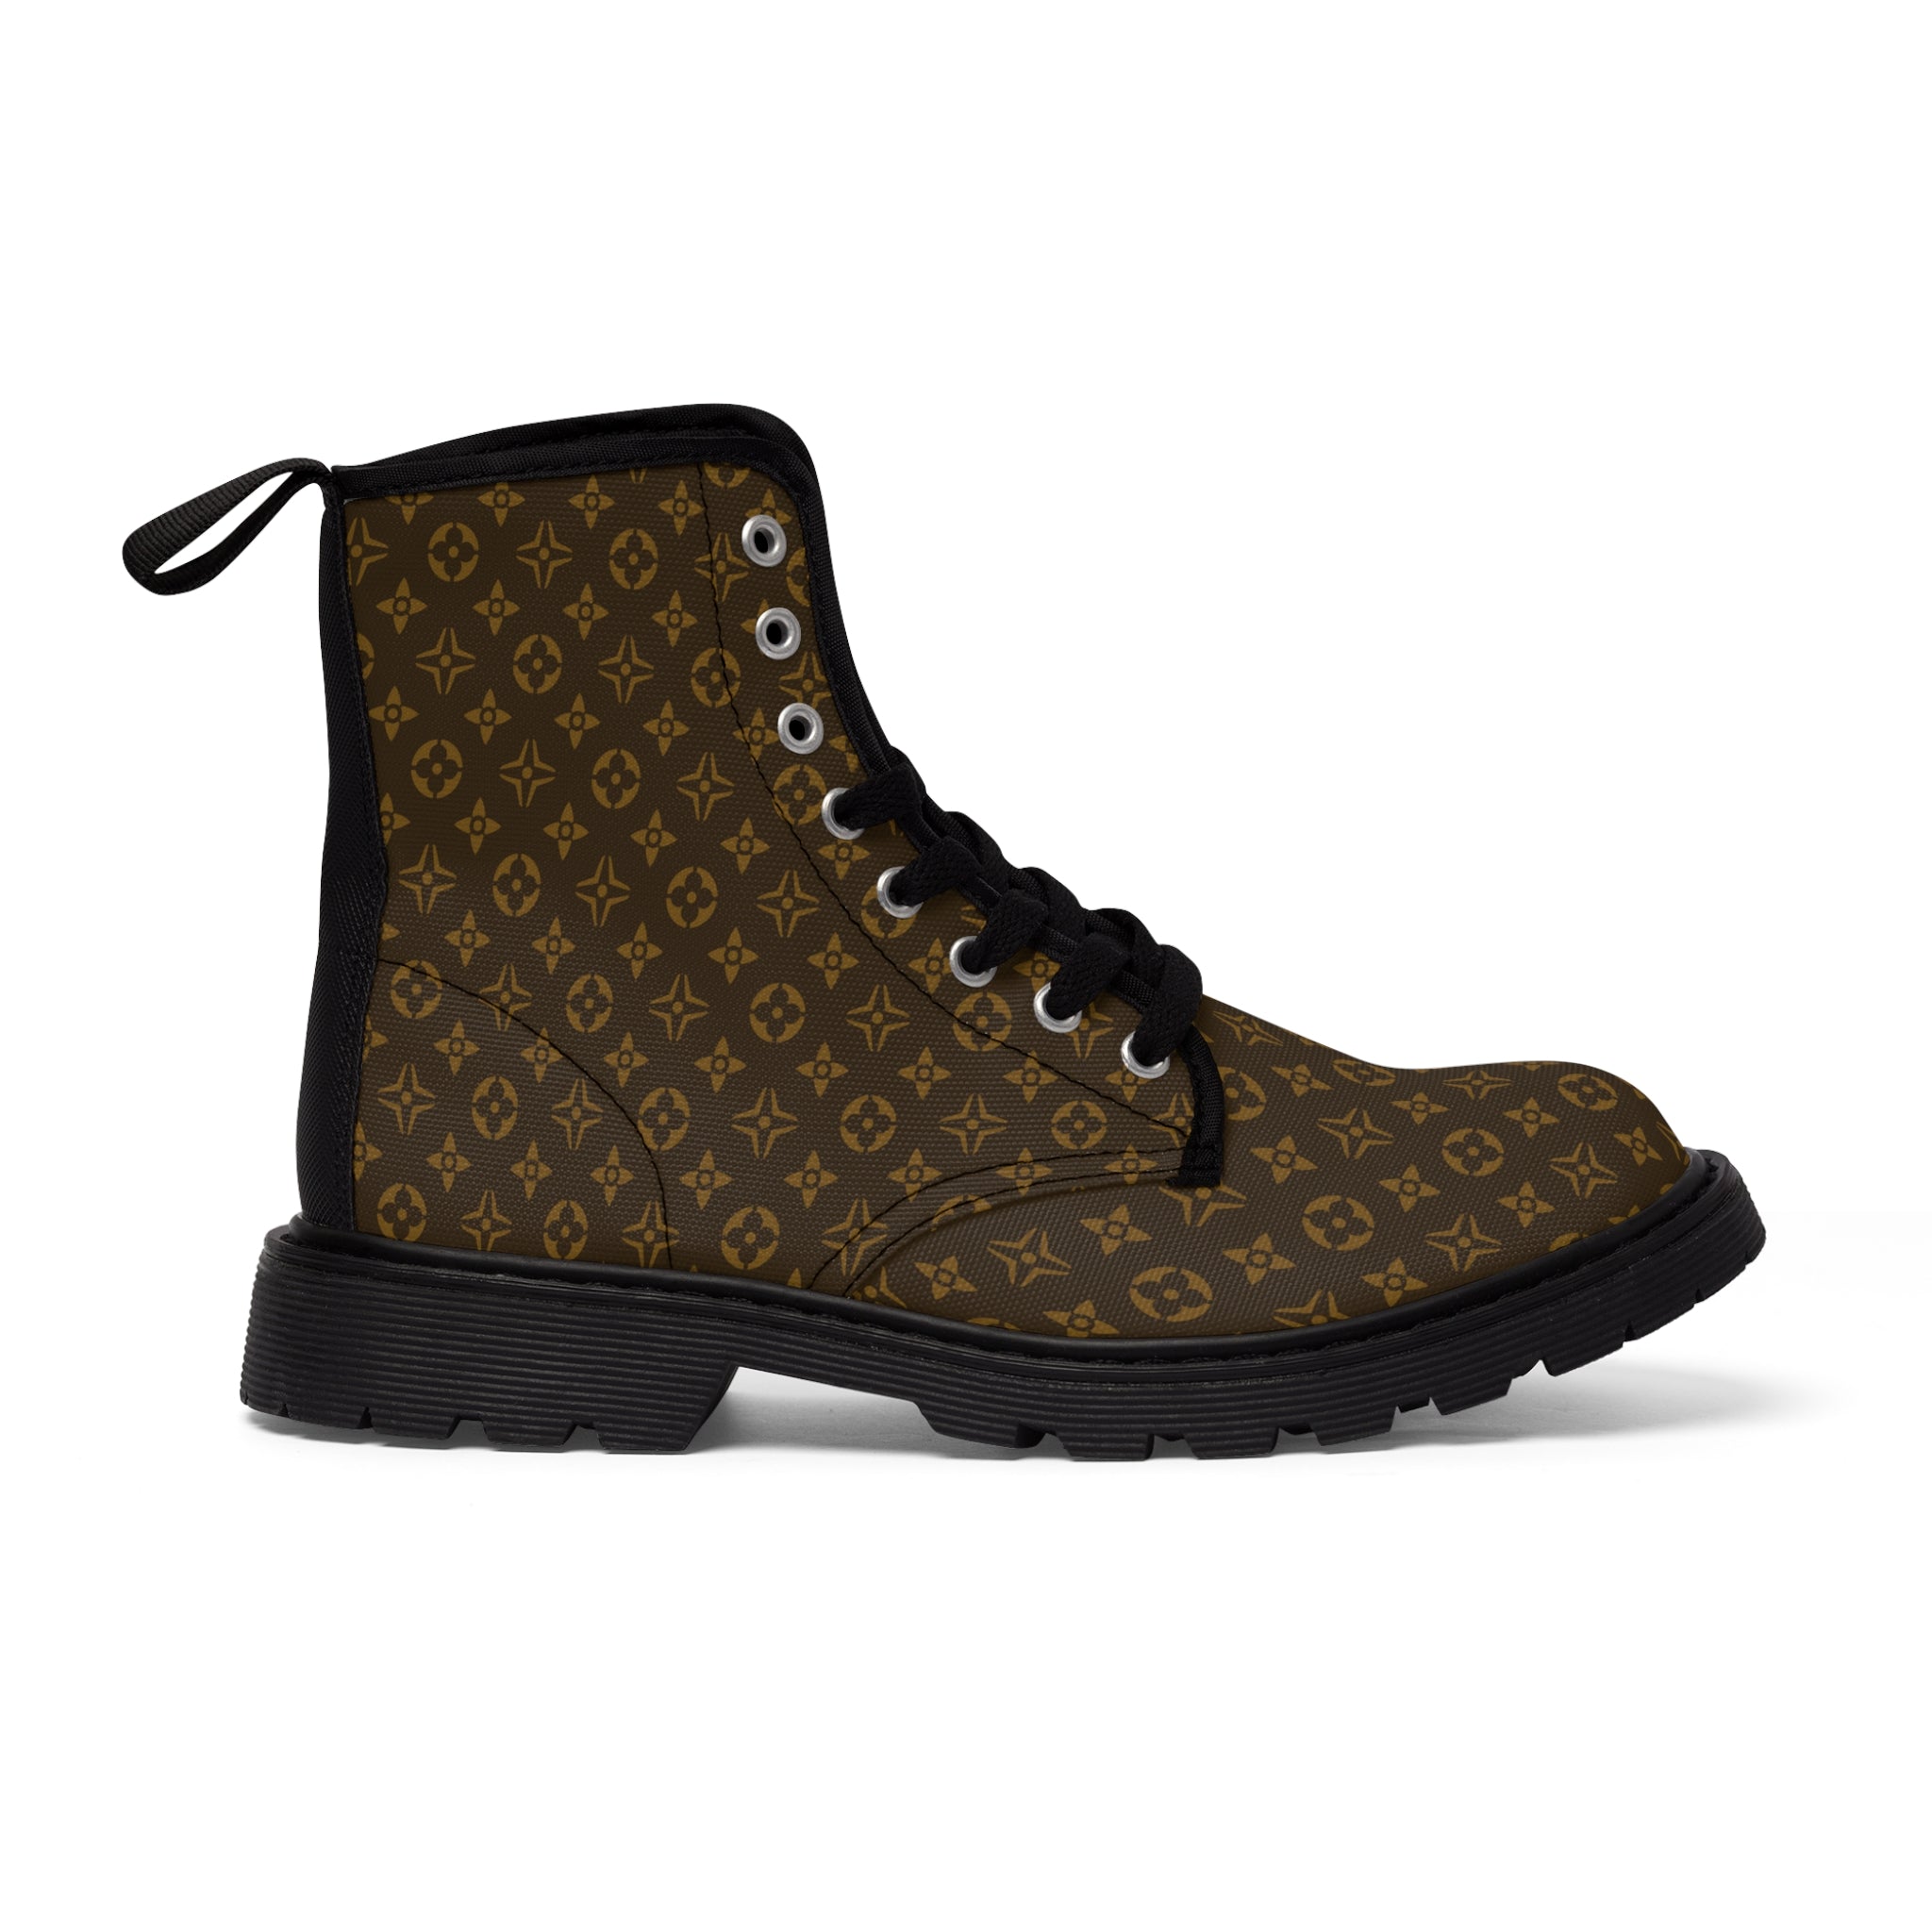  Women's Casual Wear Collection in Brown Icon Design Canvas Boots, Pattern Women's Boots Shoes